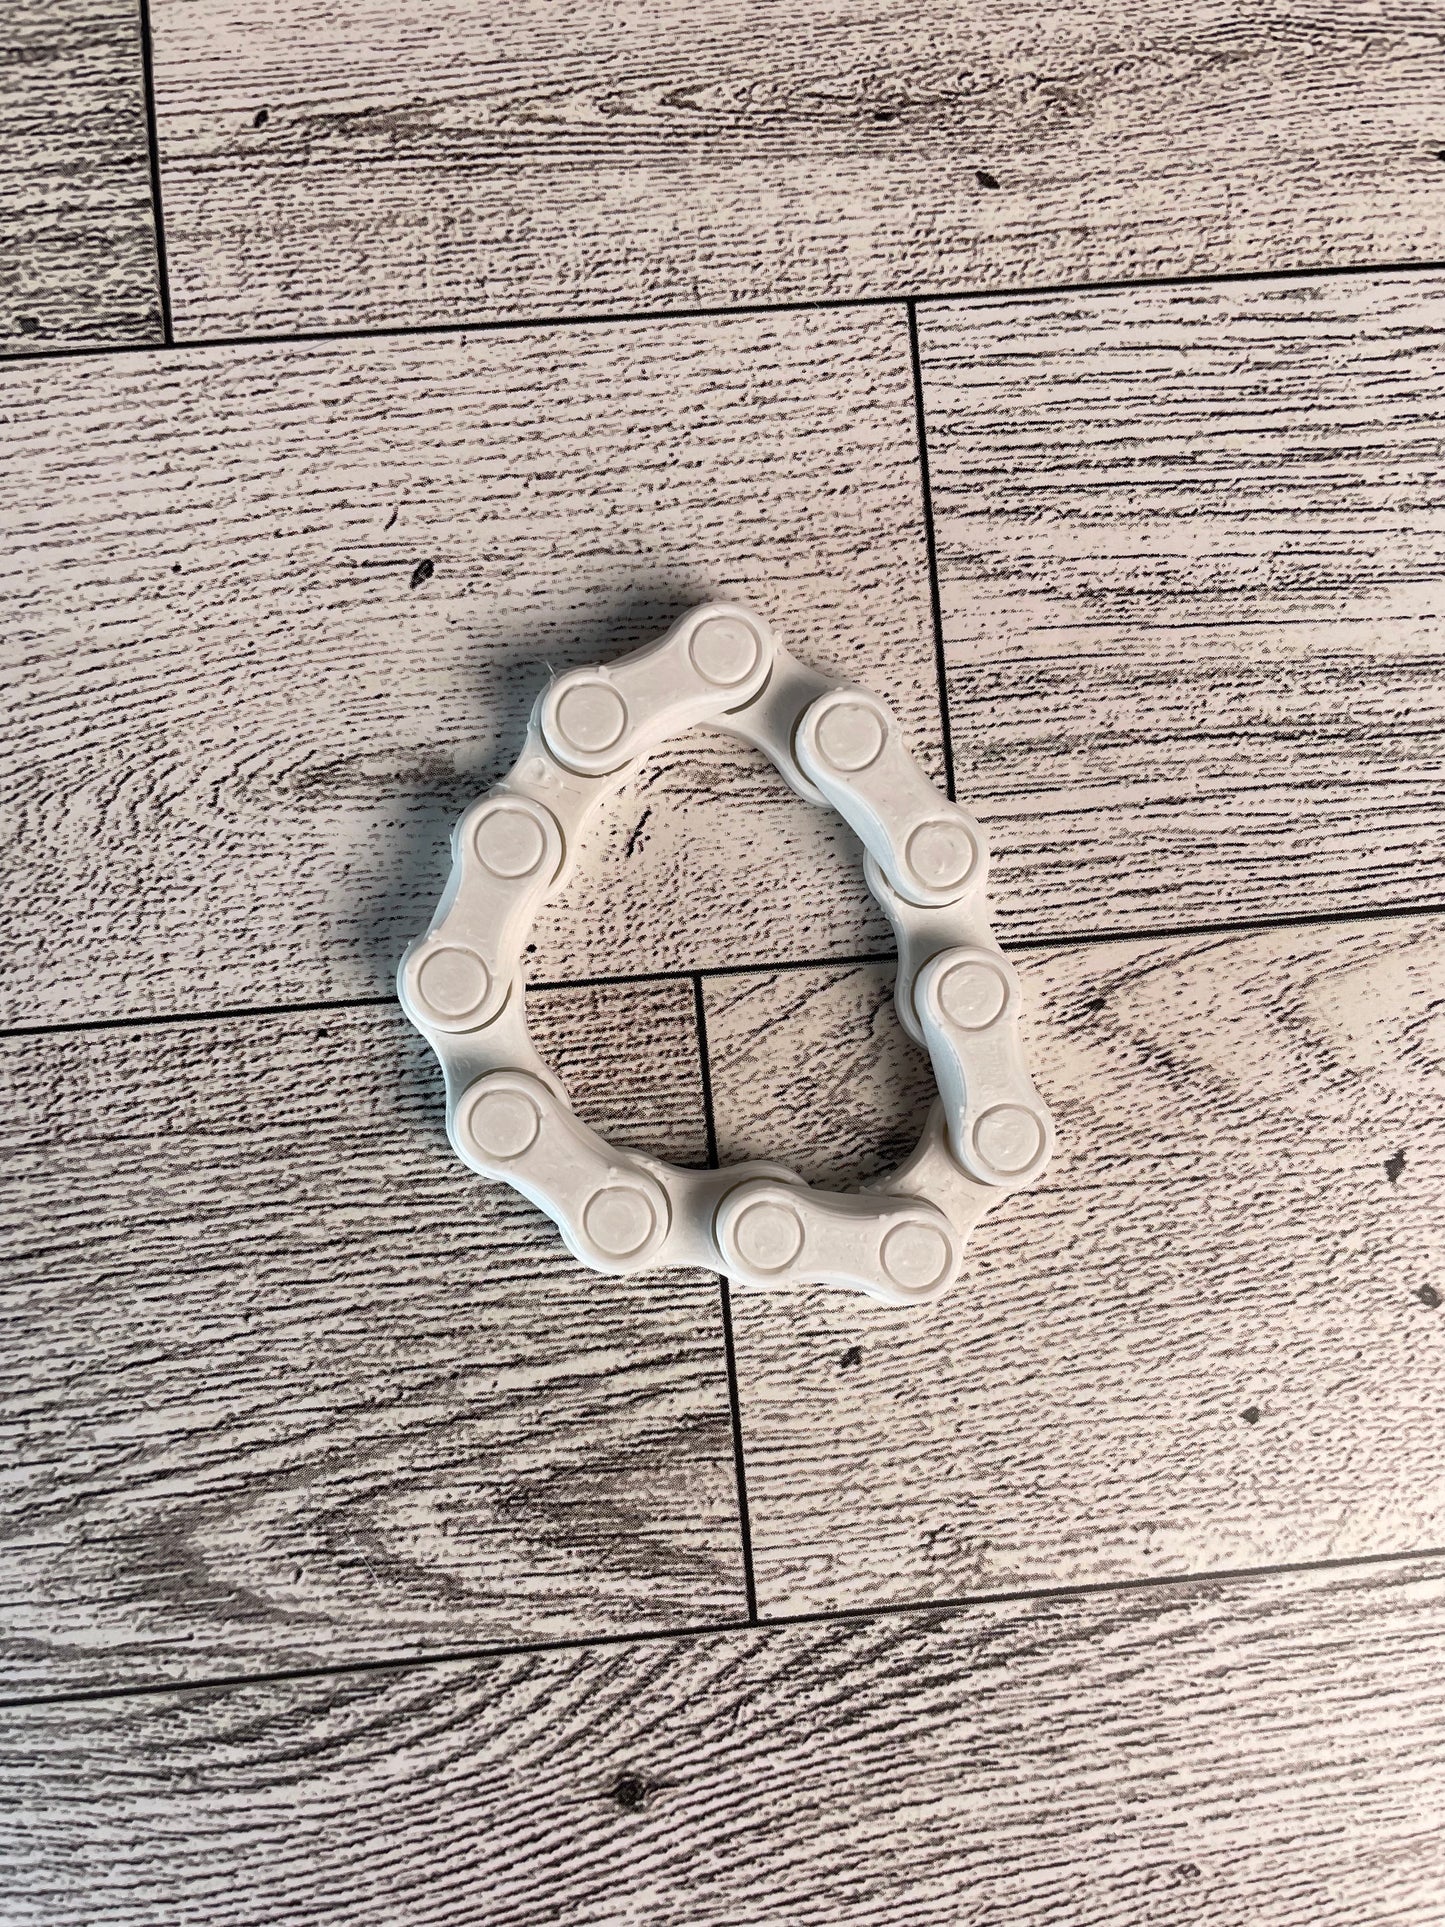 A white chain link on a wood backdrop. The chain is arranged in a circle shape and there are six links.